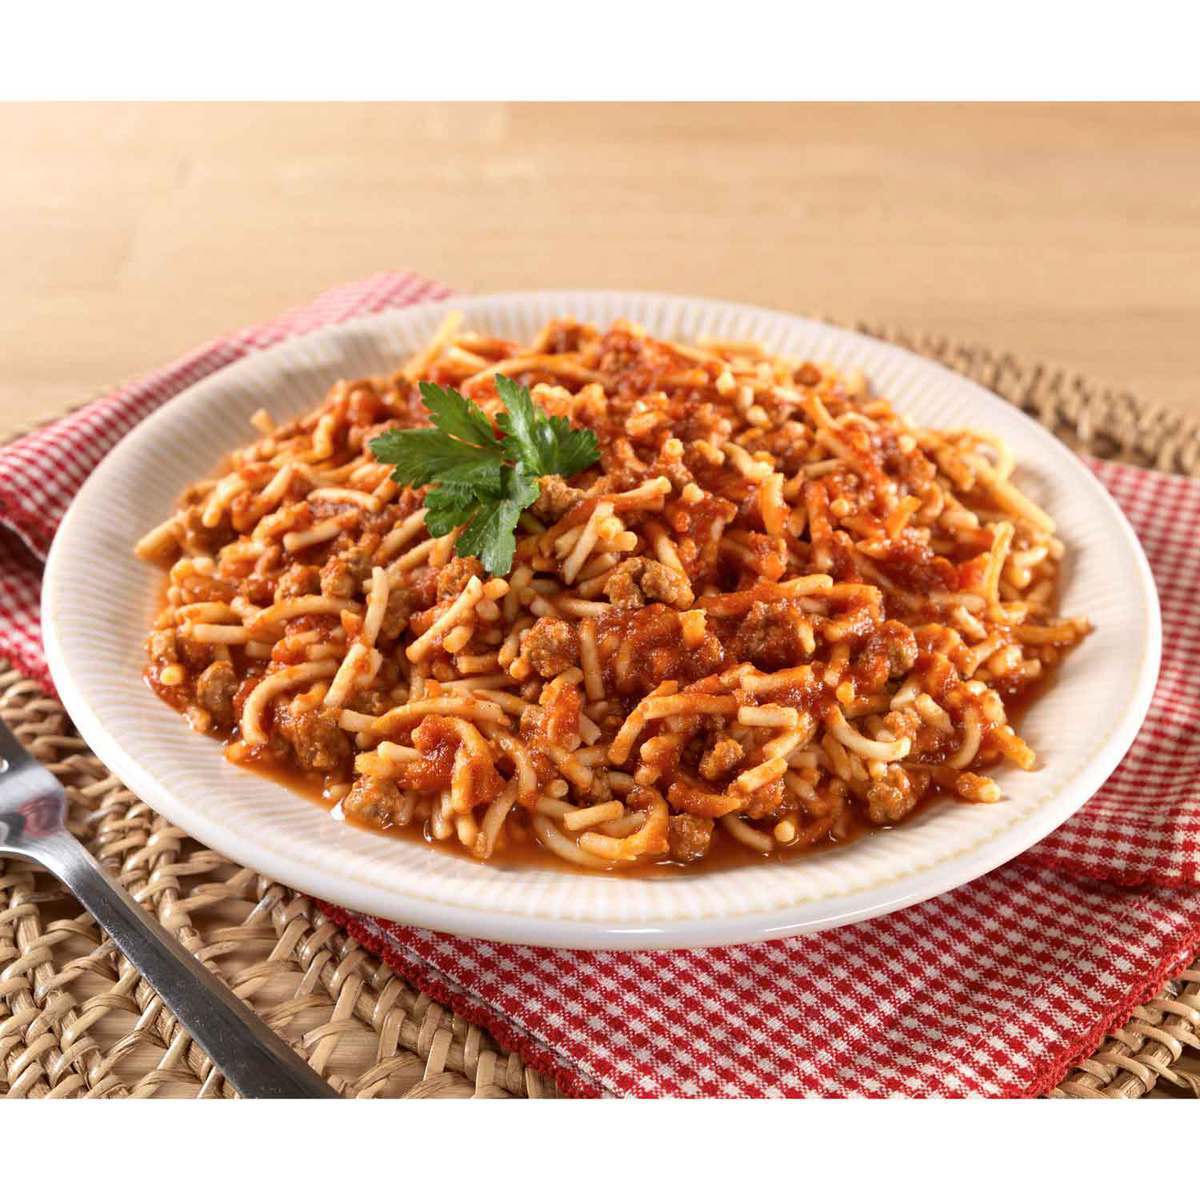 Mountain House Classic Spaghetti with Meat Sauce